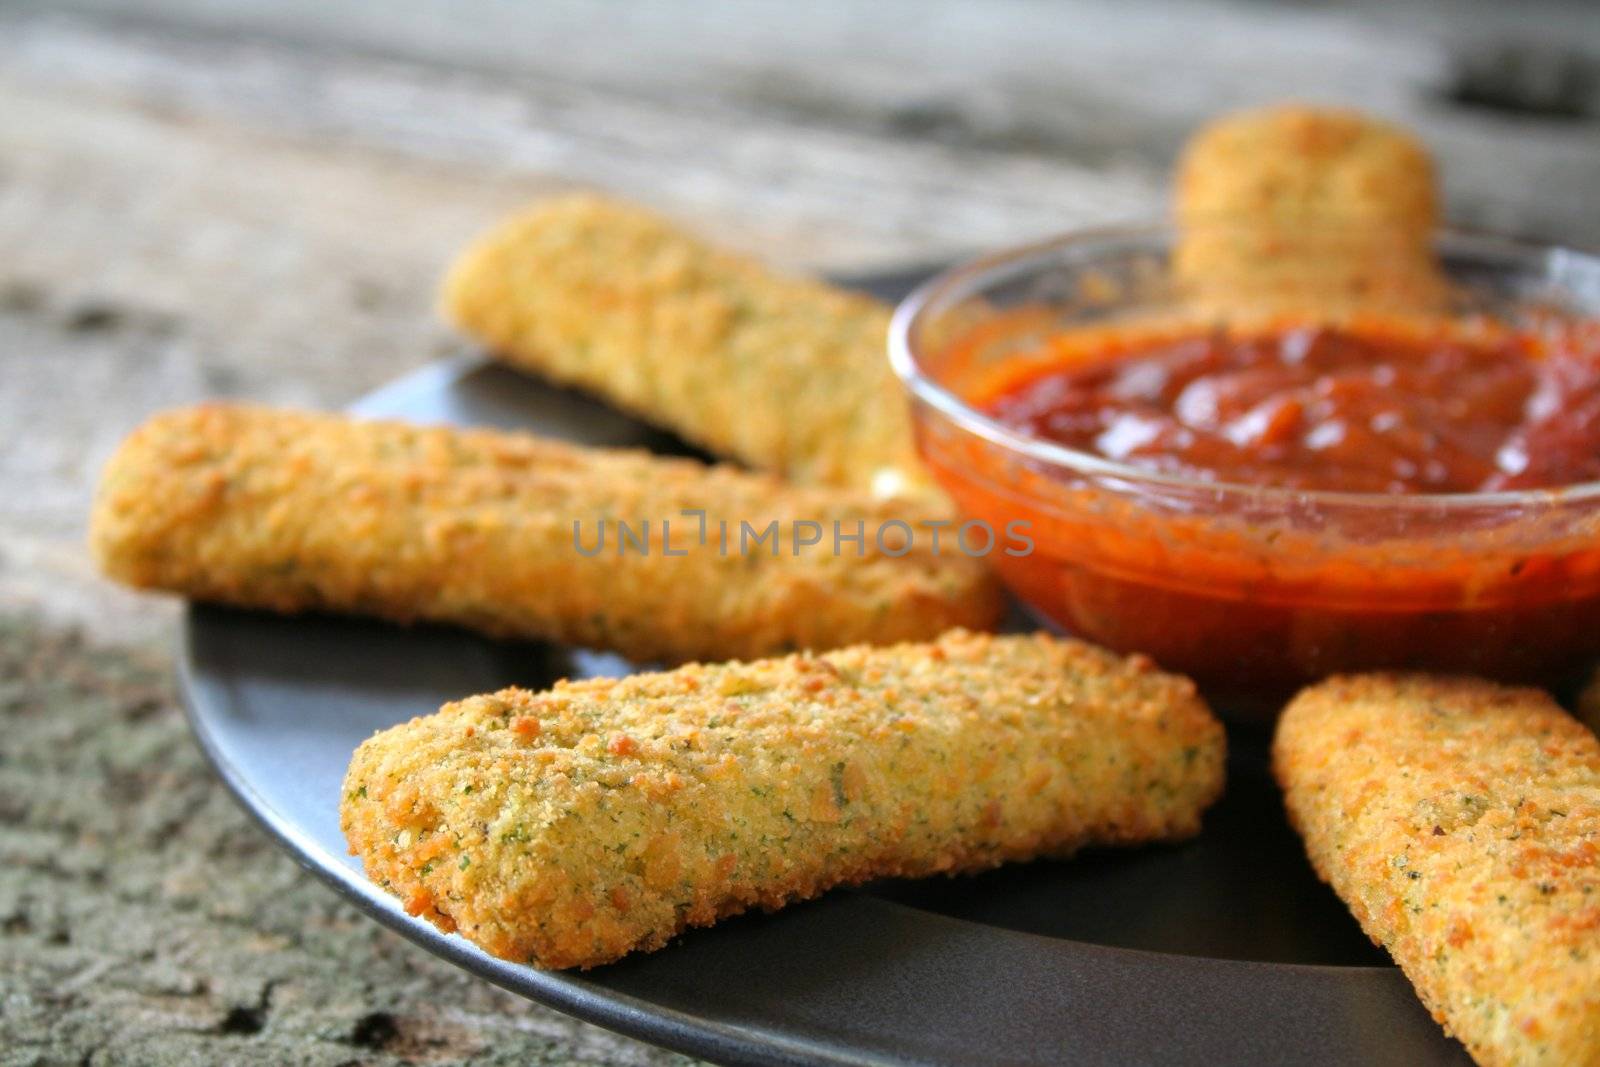 Appetizer of mozzarella cheese sticks with marinara sauce. Used a shallow depth of field.